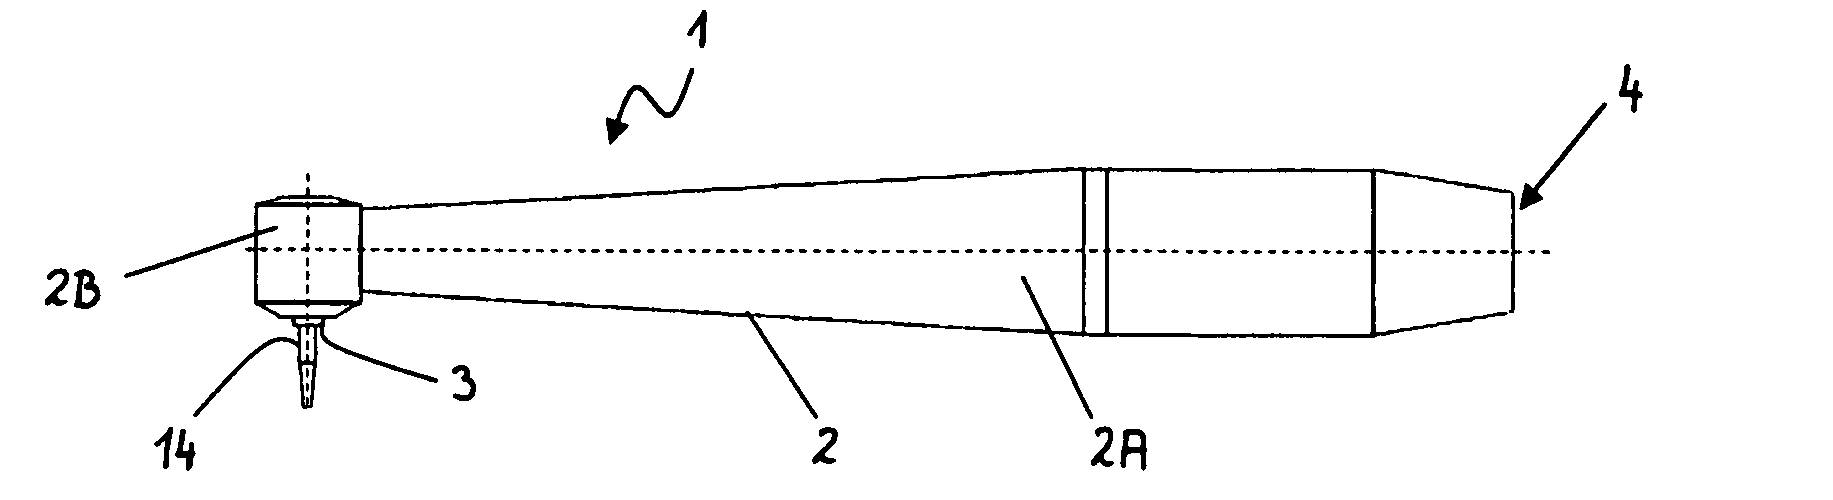 Medical or cosmetic hand-held laser device